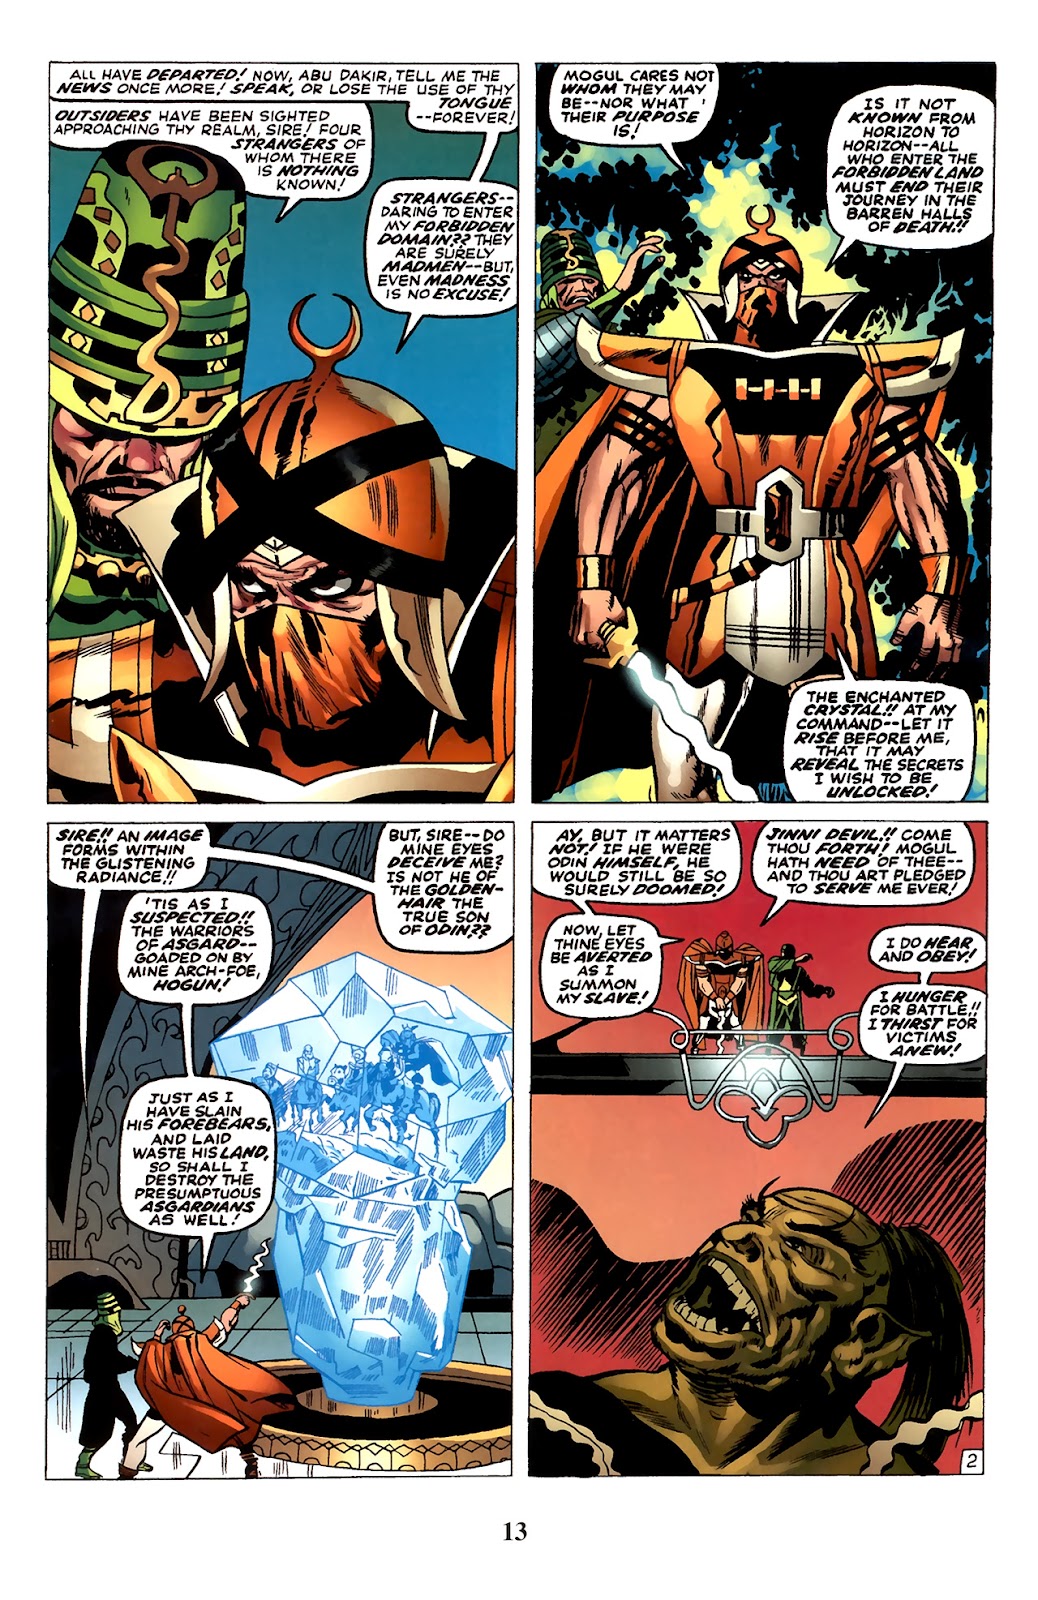 Thor: Tales of Asgard by Stan Lee & Jack Kirby issue 6 - Page 15